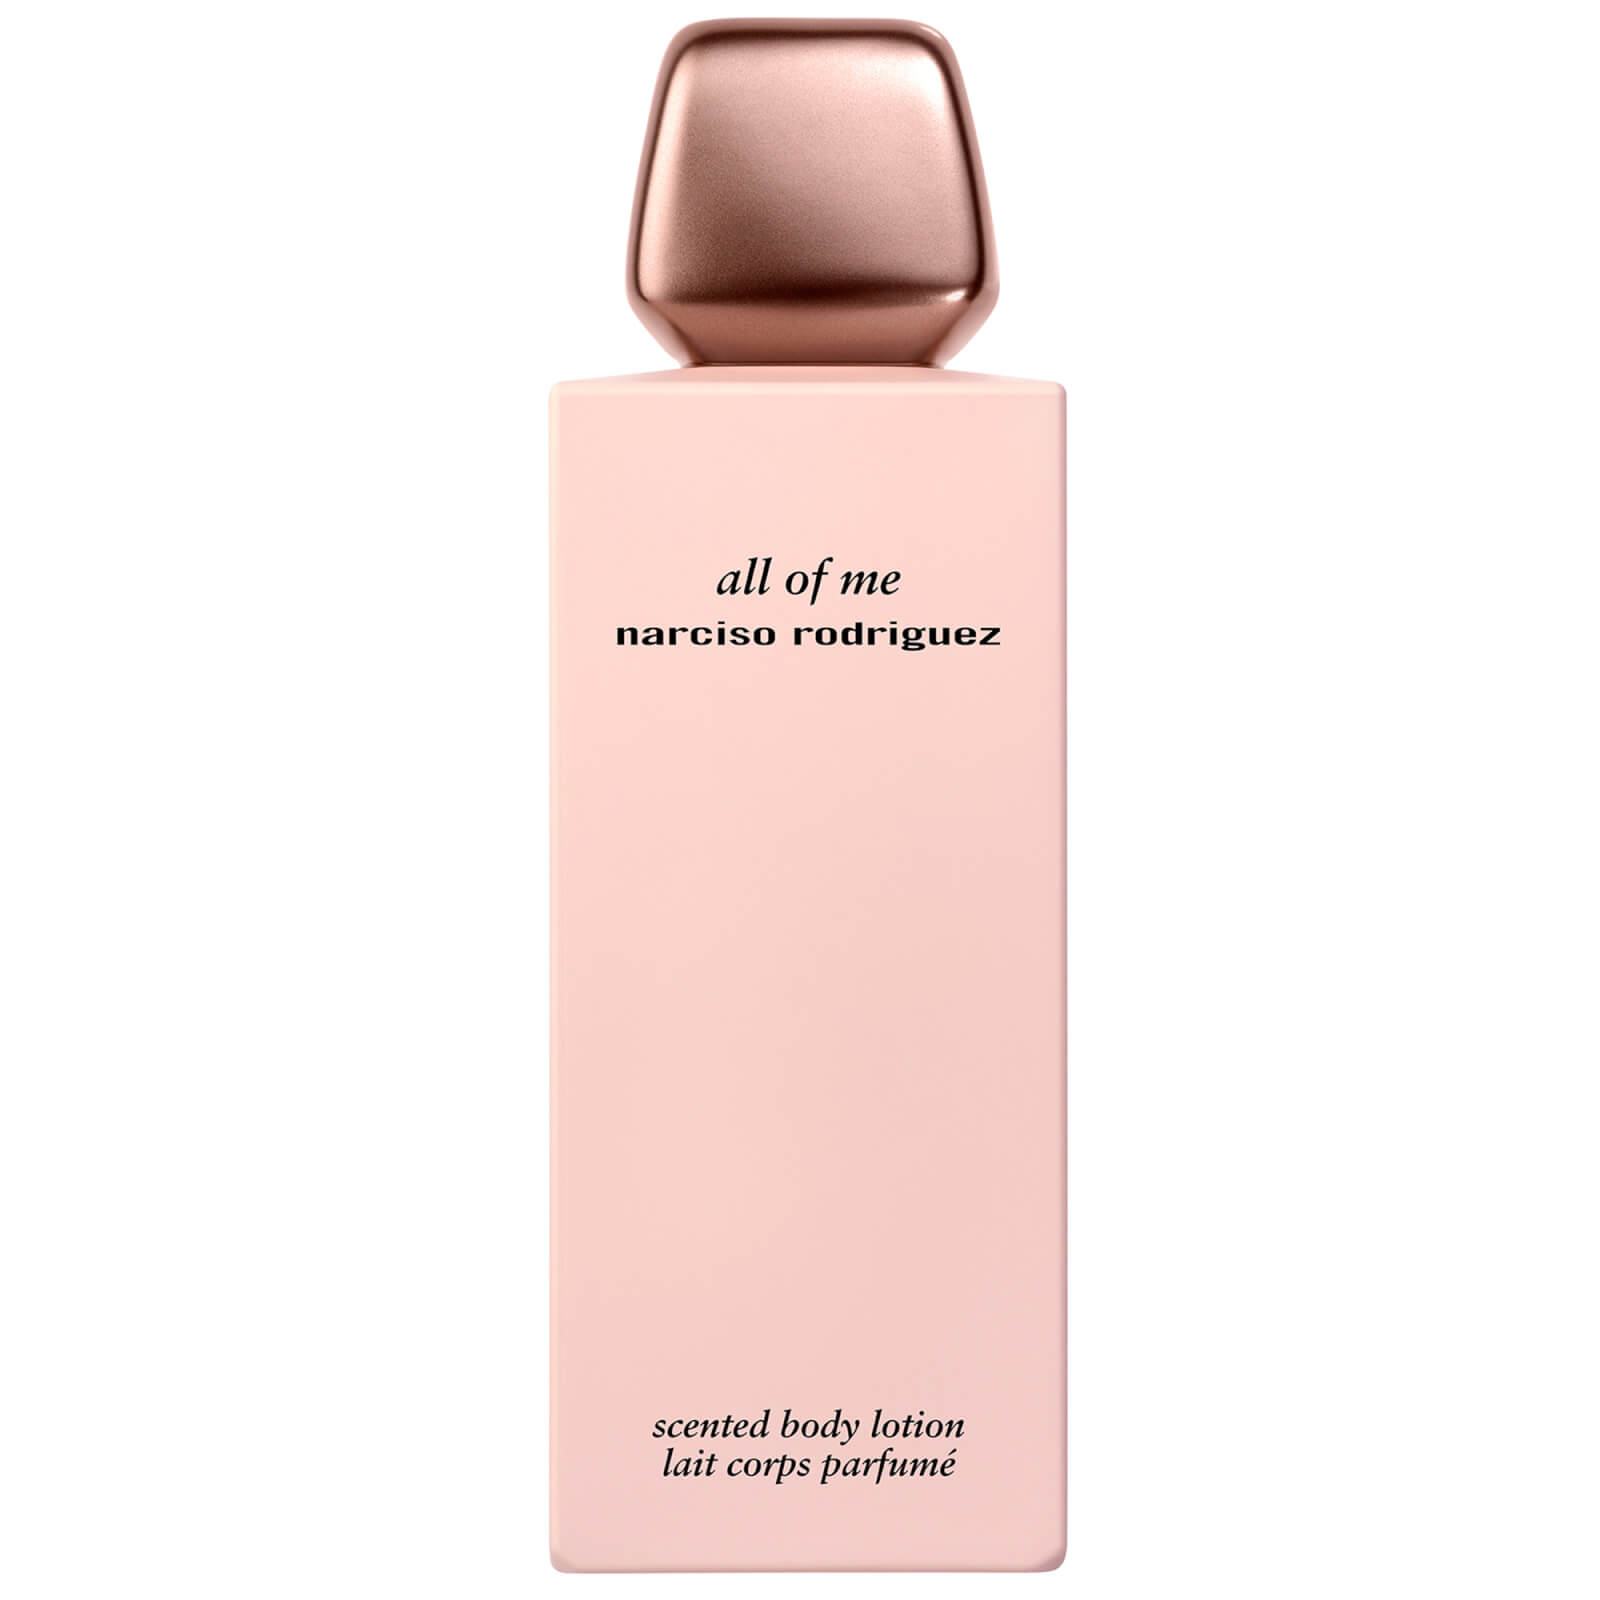 Image of Narciso Rodriguez All of Me Body Lotion 200ml